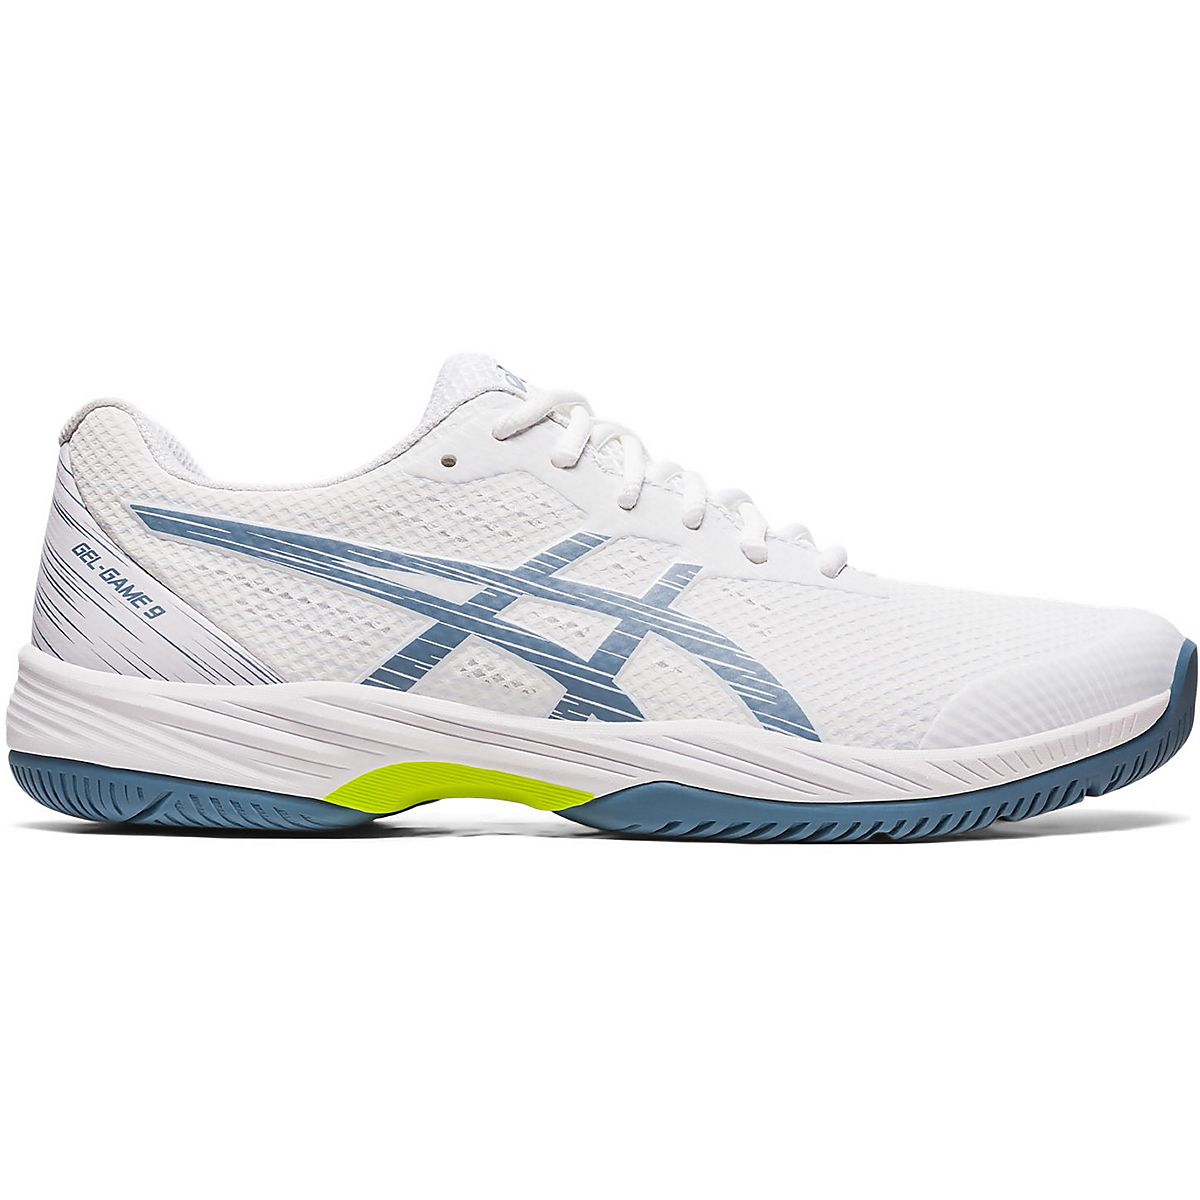 ASICS Men's Gel-Game 9 Tennis Shoes | Free Shipping at Academy